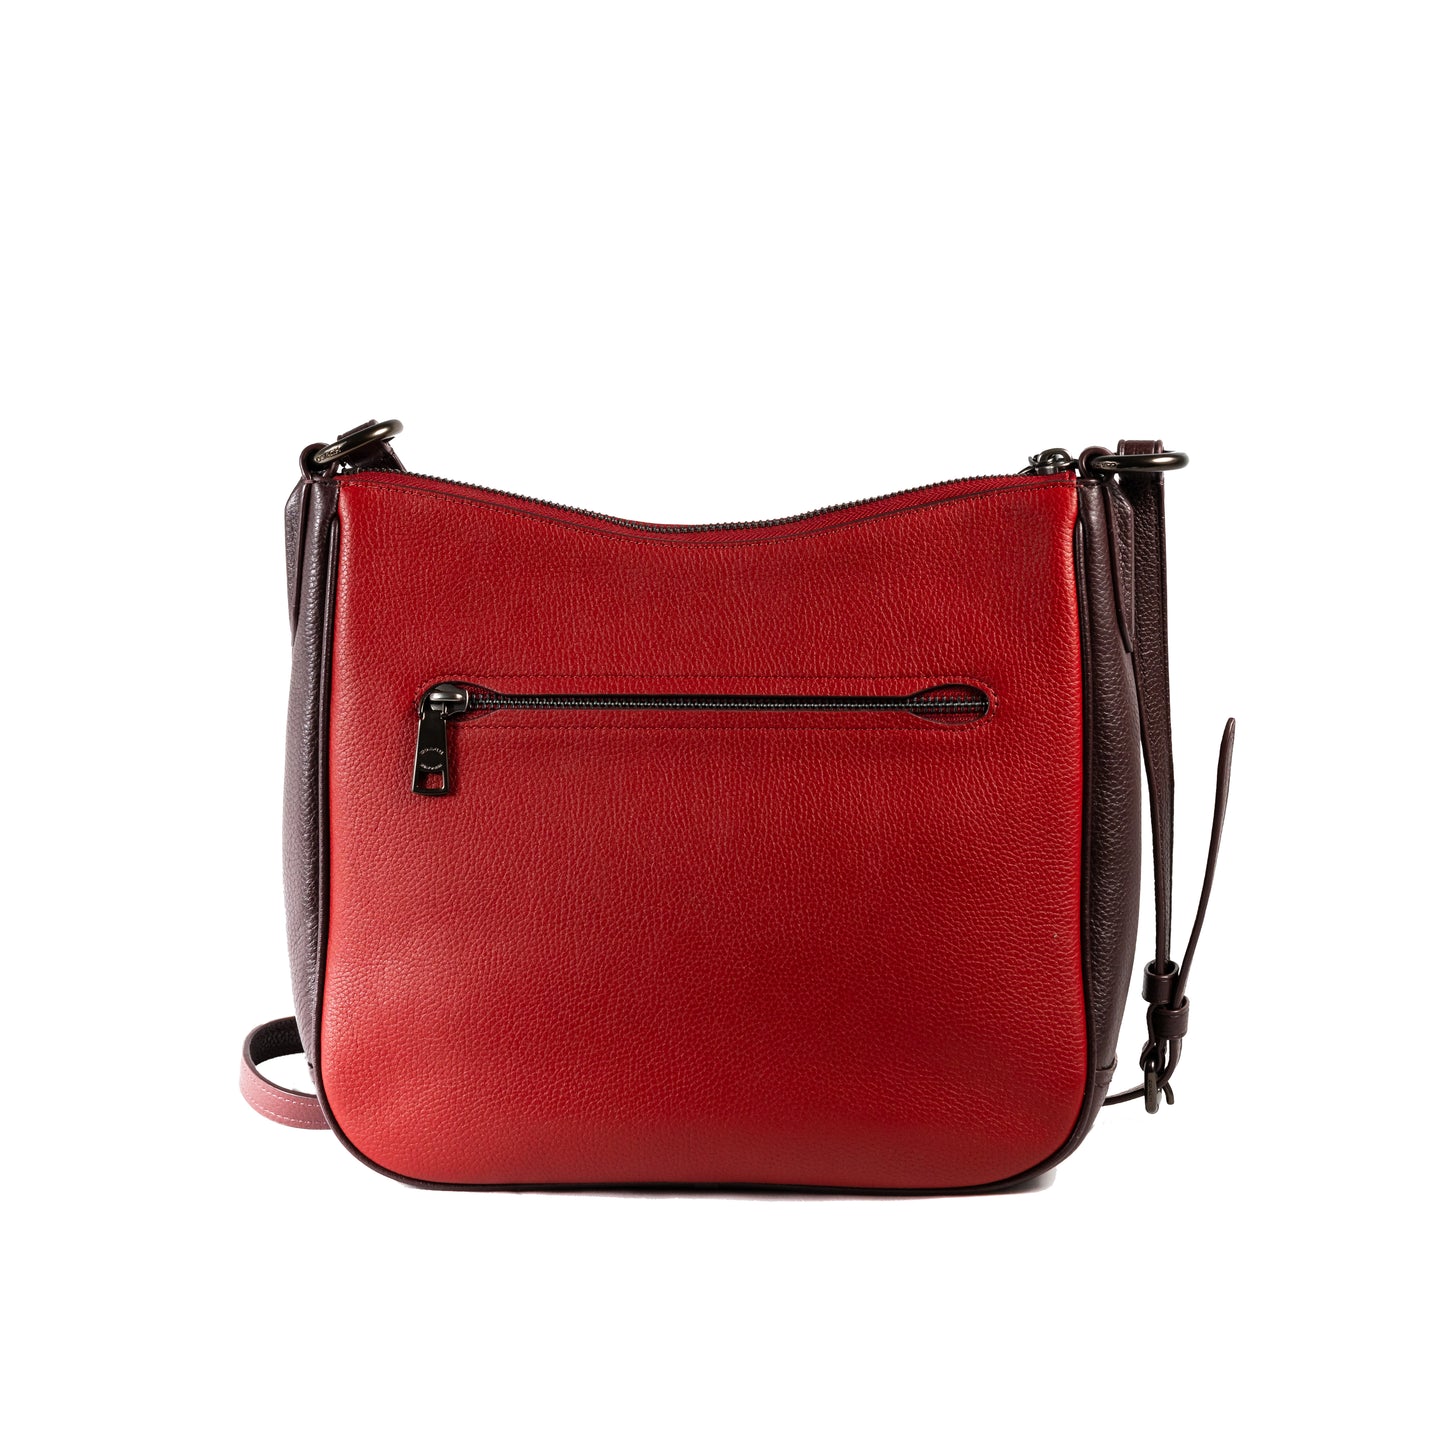 Coach Chaise Women's Colorblock Leather Crossbody Messenger Bag - Red